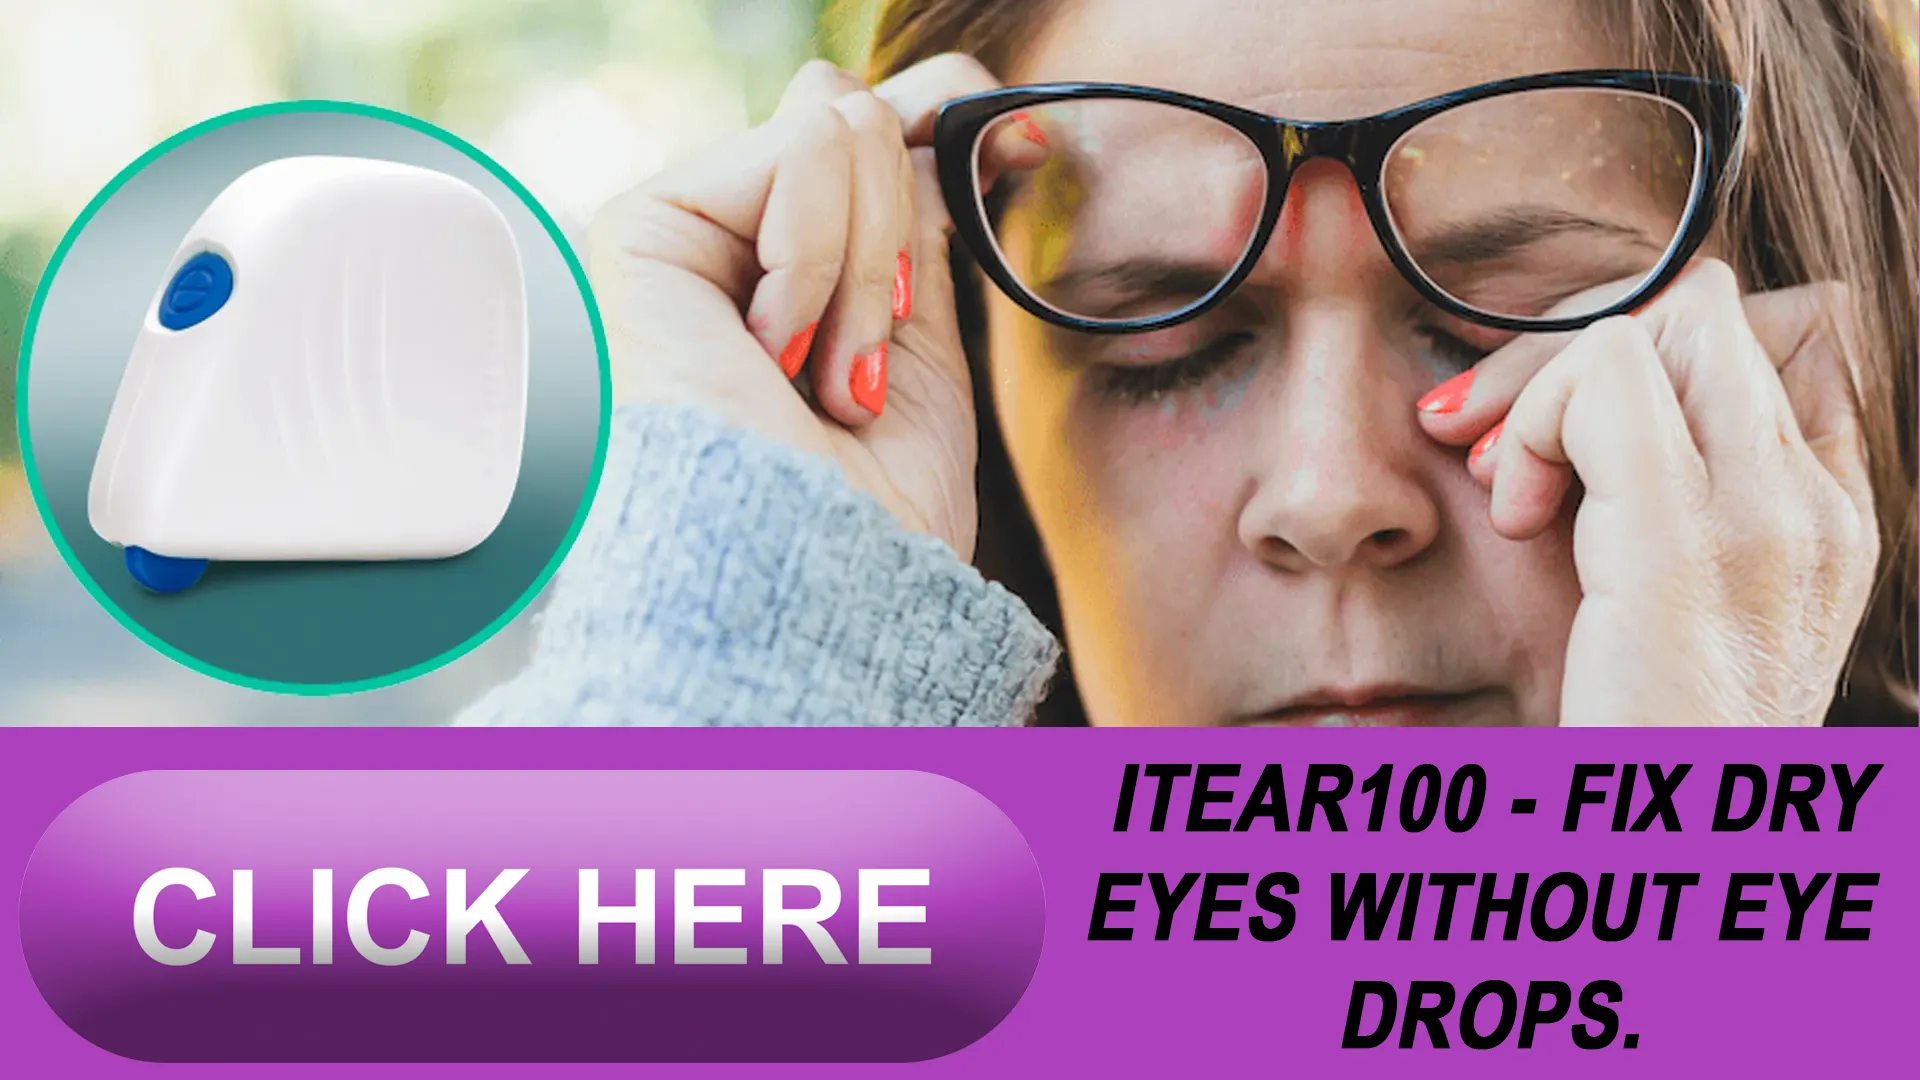 Easy Steps to Get Started with iTEAR100